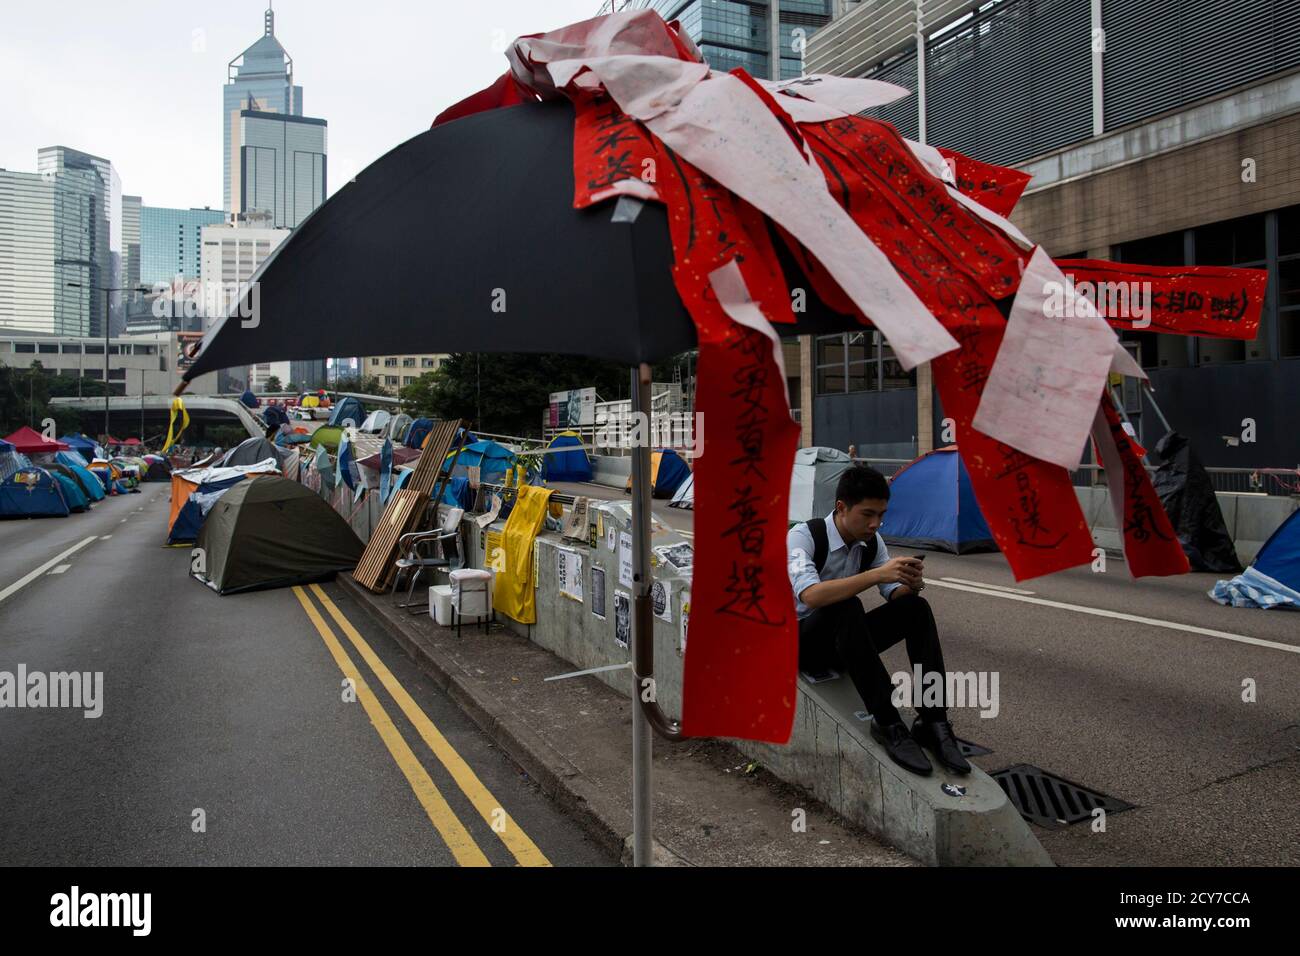 A pro-democracy protester sits on a divider next to an umbrella with protest messages, reading 'We want universal suffrage', in an occupied area outside the government headquarters in Hong Kong November 12, 2014. Hong Kong's acting chief executive on Tuesday called on pro-democracy protesters to clear sites they have occupied for more than six weeks and warned holdouts they could face arrest, a move that could swell protest numbers.   REUTERS/Tyrone Siu (CHINA - Tags: POLITICS CIVIL UNREST) Stock Photo